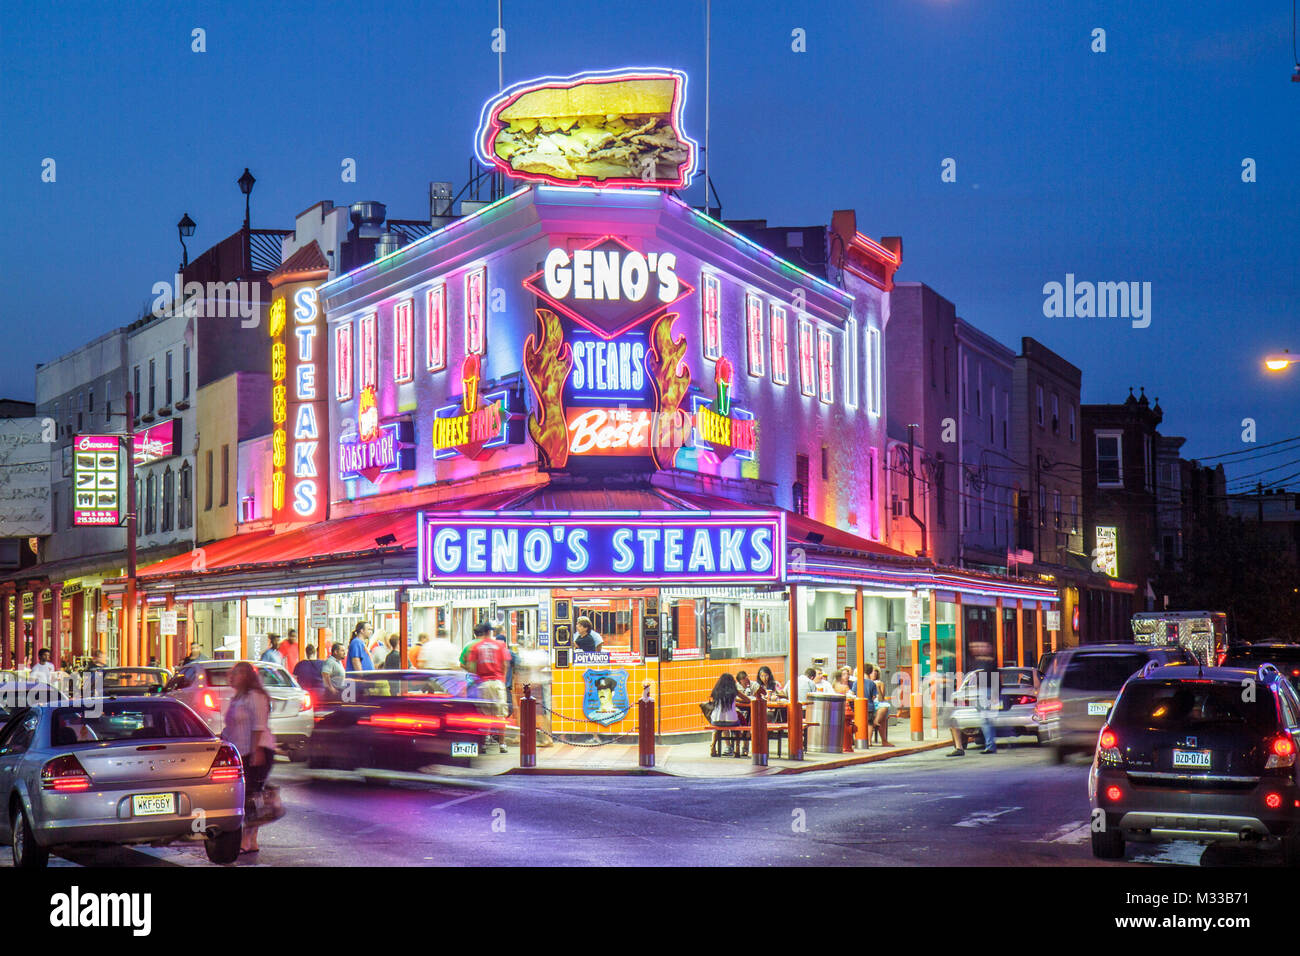 Philadelphia Pennsylvania,South Philly,South 9th Street,Geno's,restaurant restaurants food dining cafe cafes,sandwich shop,Philly cheesesteak,feud,tra Stock Photo